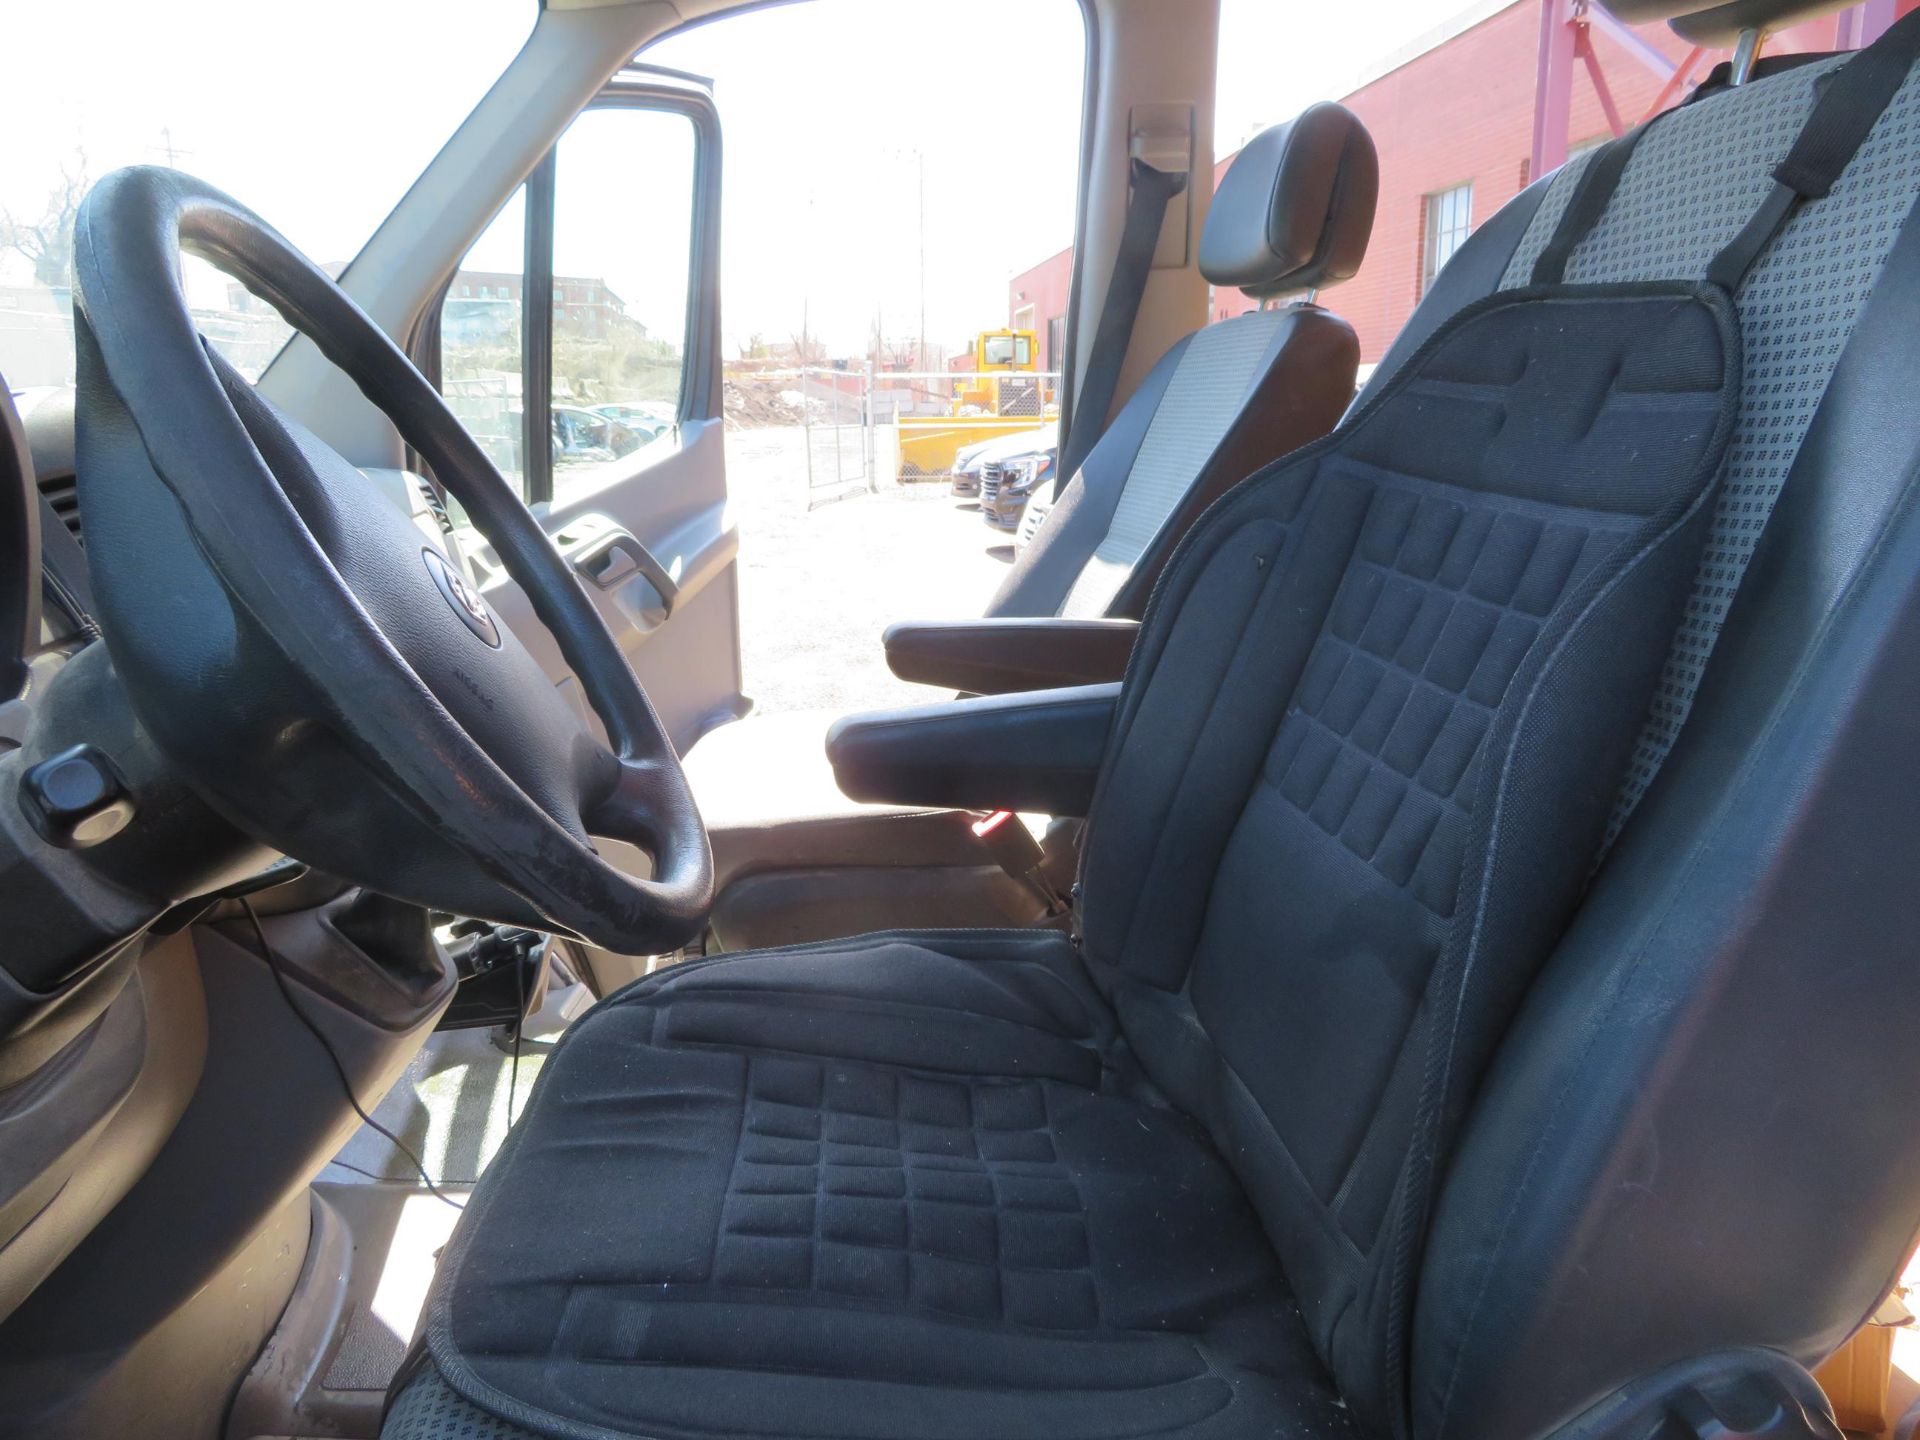 DODGE Sprinter 2007 CRD, 170 000 KM, Diesel, 3.0 L, Automatic, 18ft long, air (walk-in) VIN: - Image 6 of 8